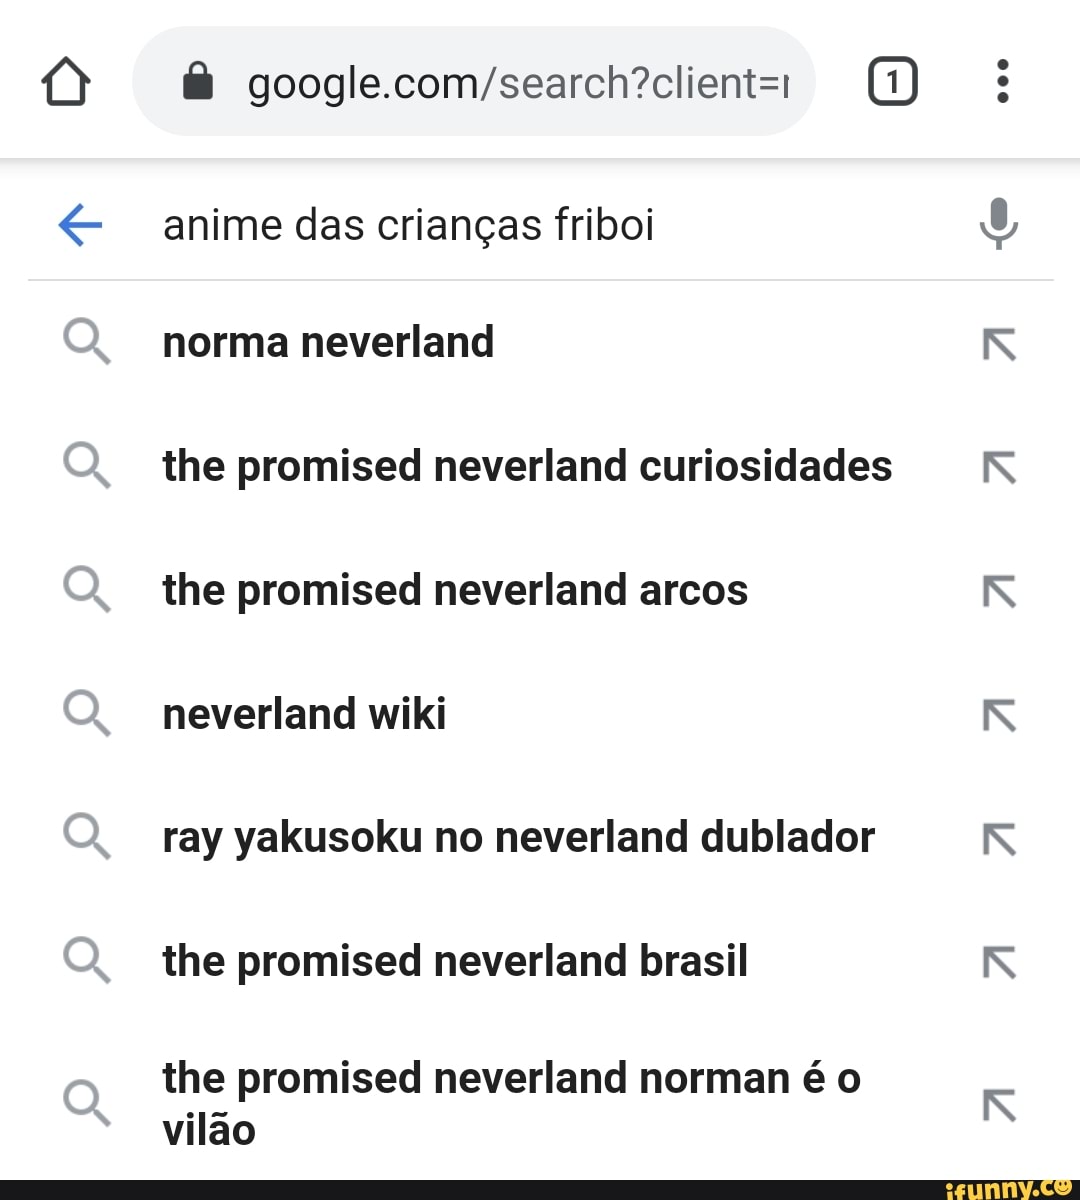 Anime das criangas friboi norma neverland PP the promised